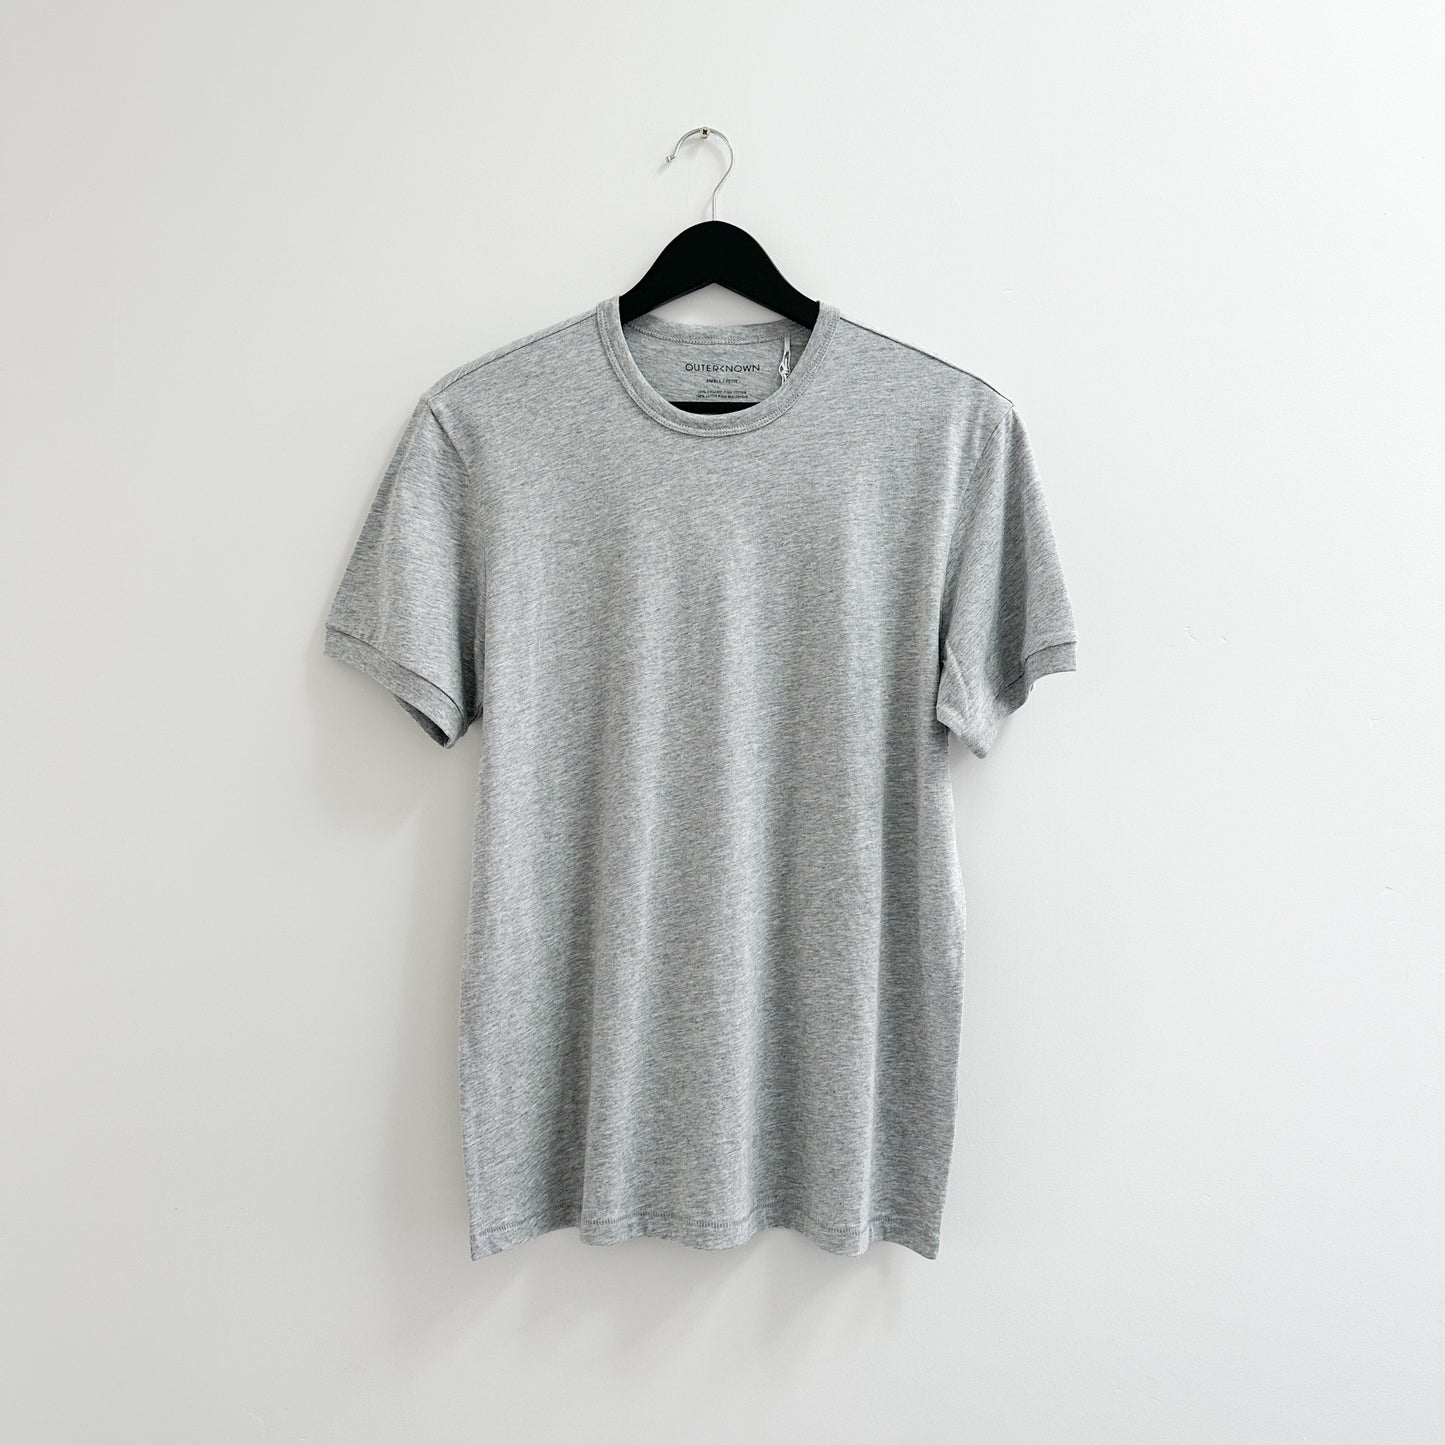 Outerknown - Sojourn Tee in Heather Grey